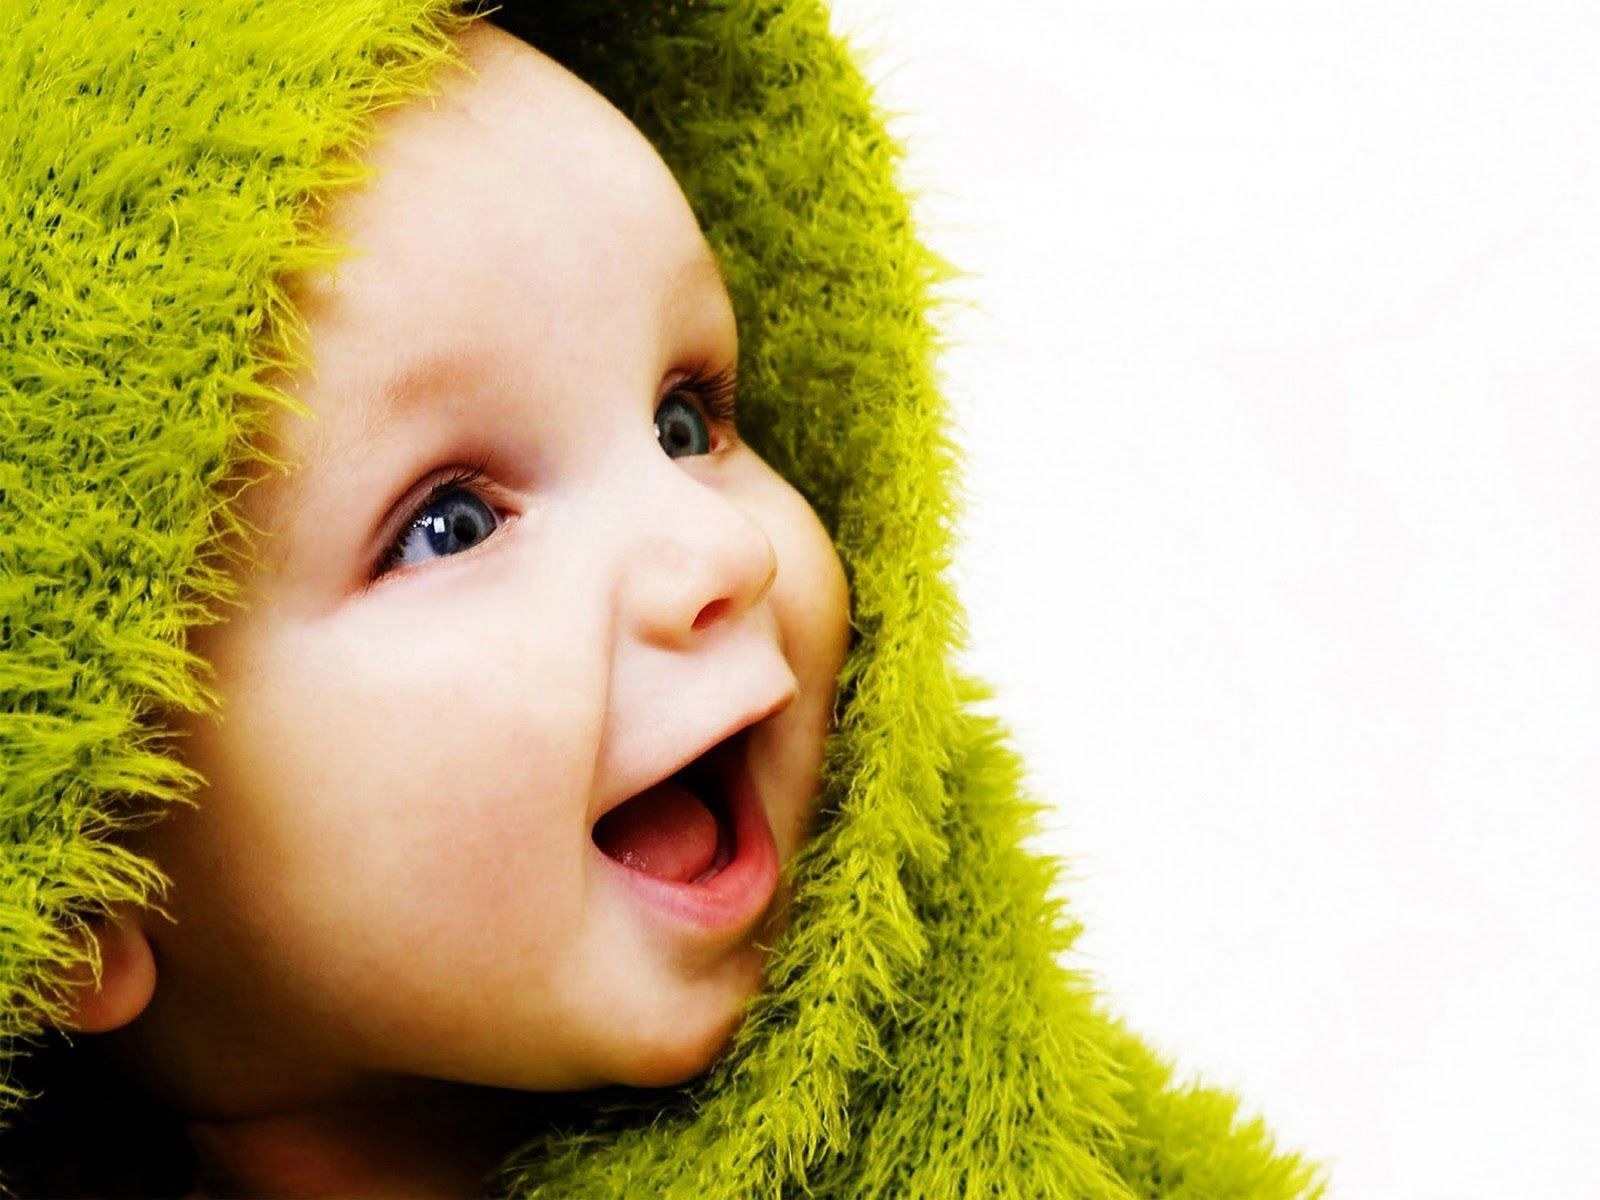 Cute Baby Smile HD wallpapers free download | Wallpaperbetter